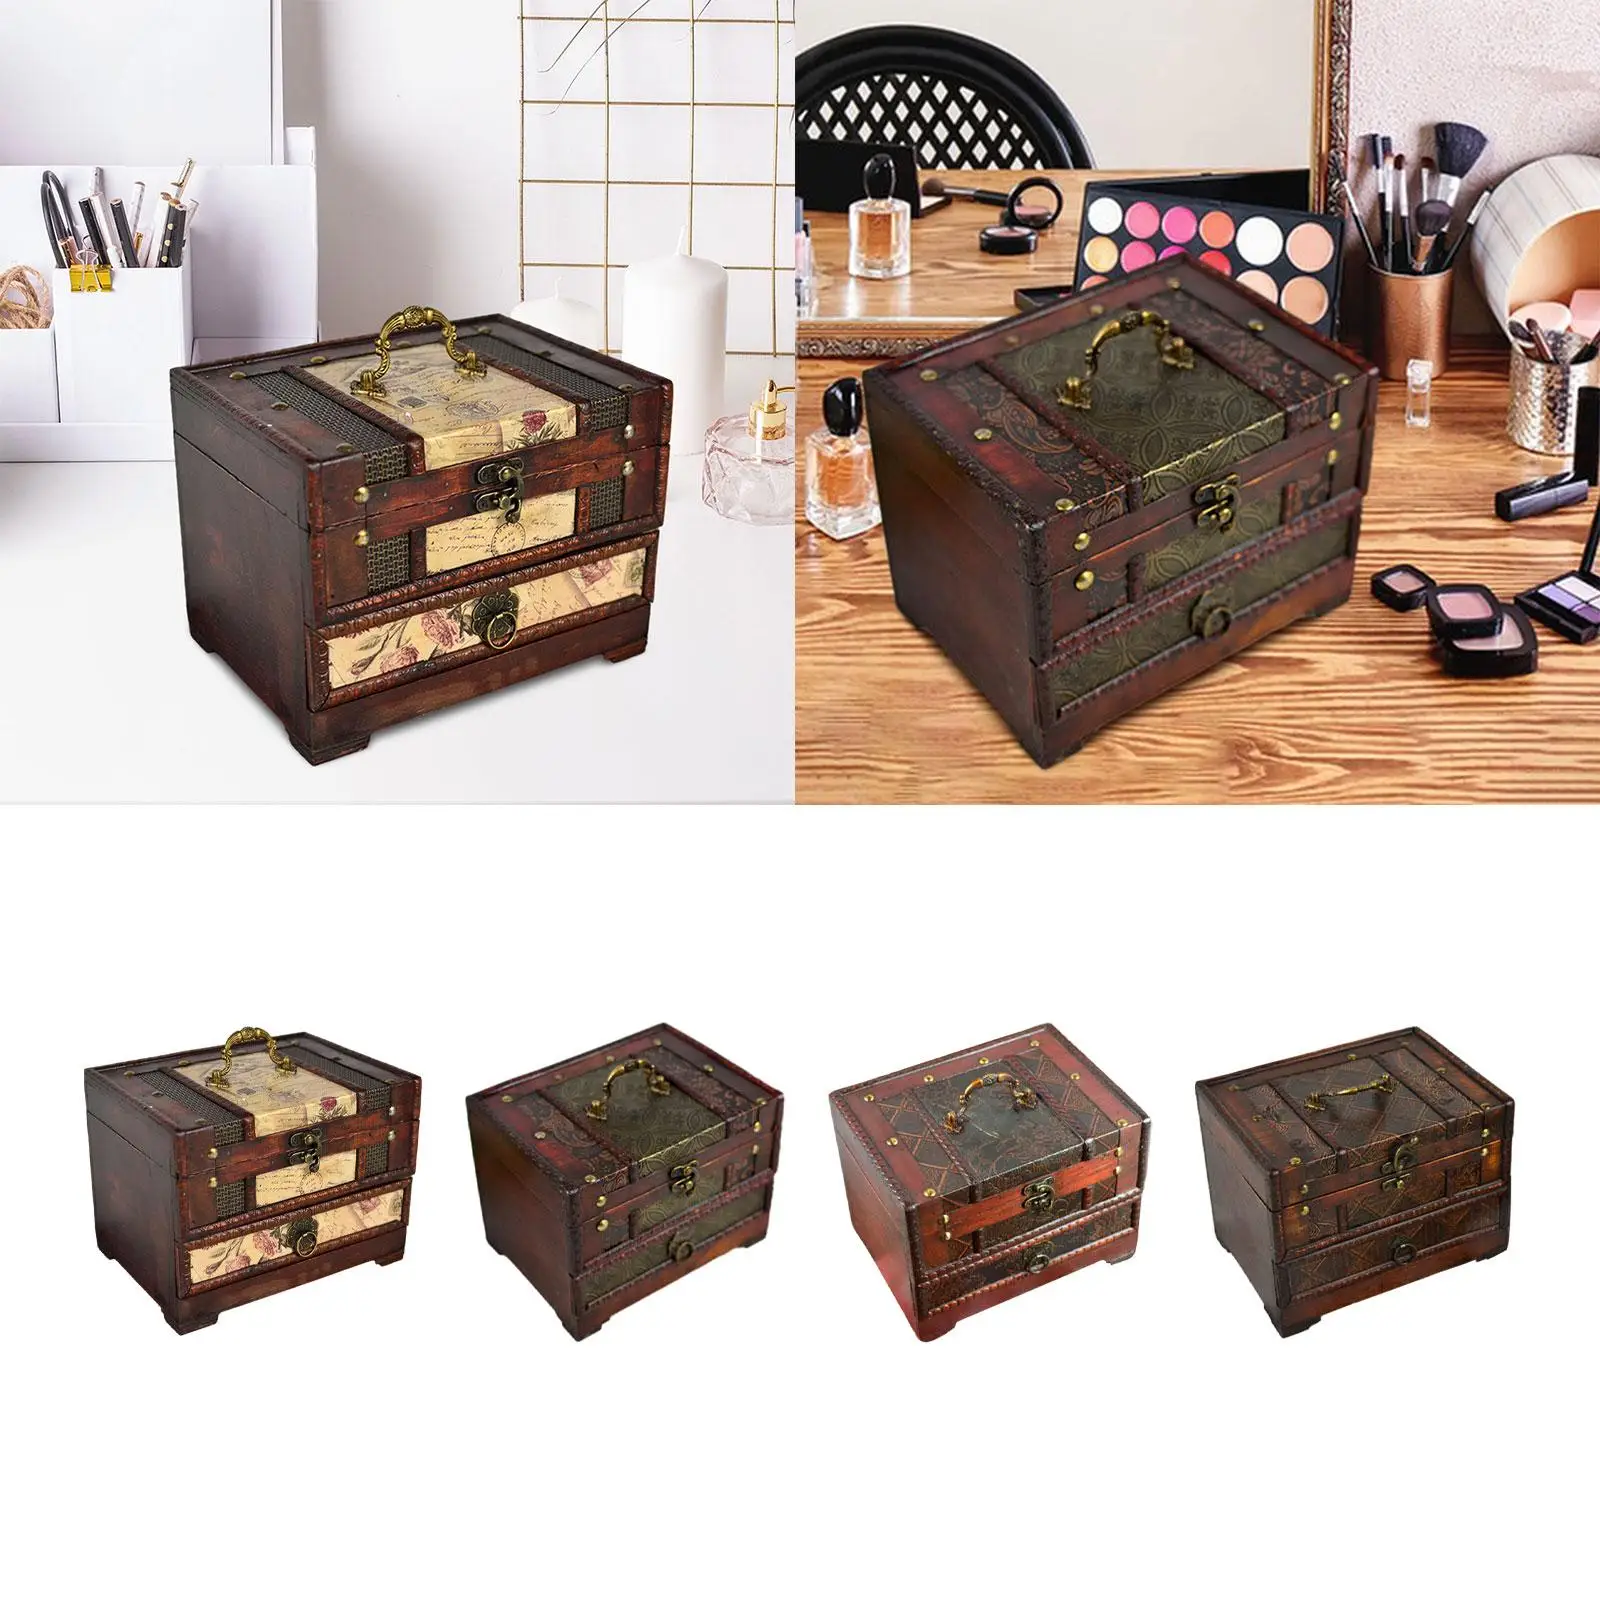 Vintage Wooden Jewelry Box Classical Jewelry Case Holder Rectangle Container 3 Layer with Mirror Decorative Storage Box